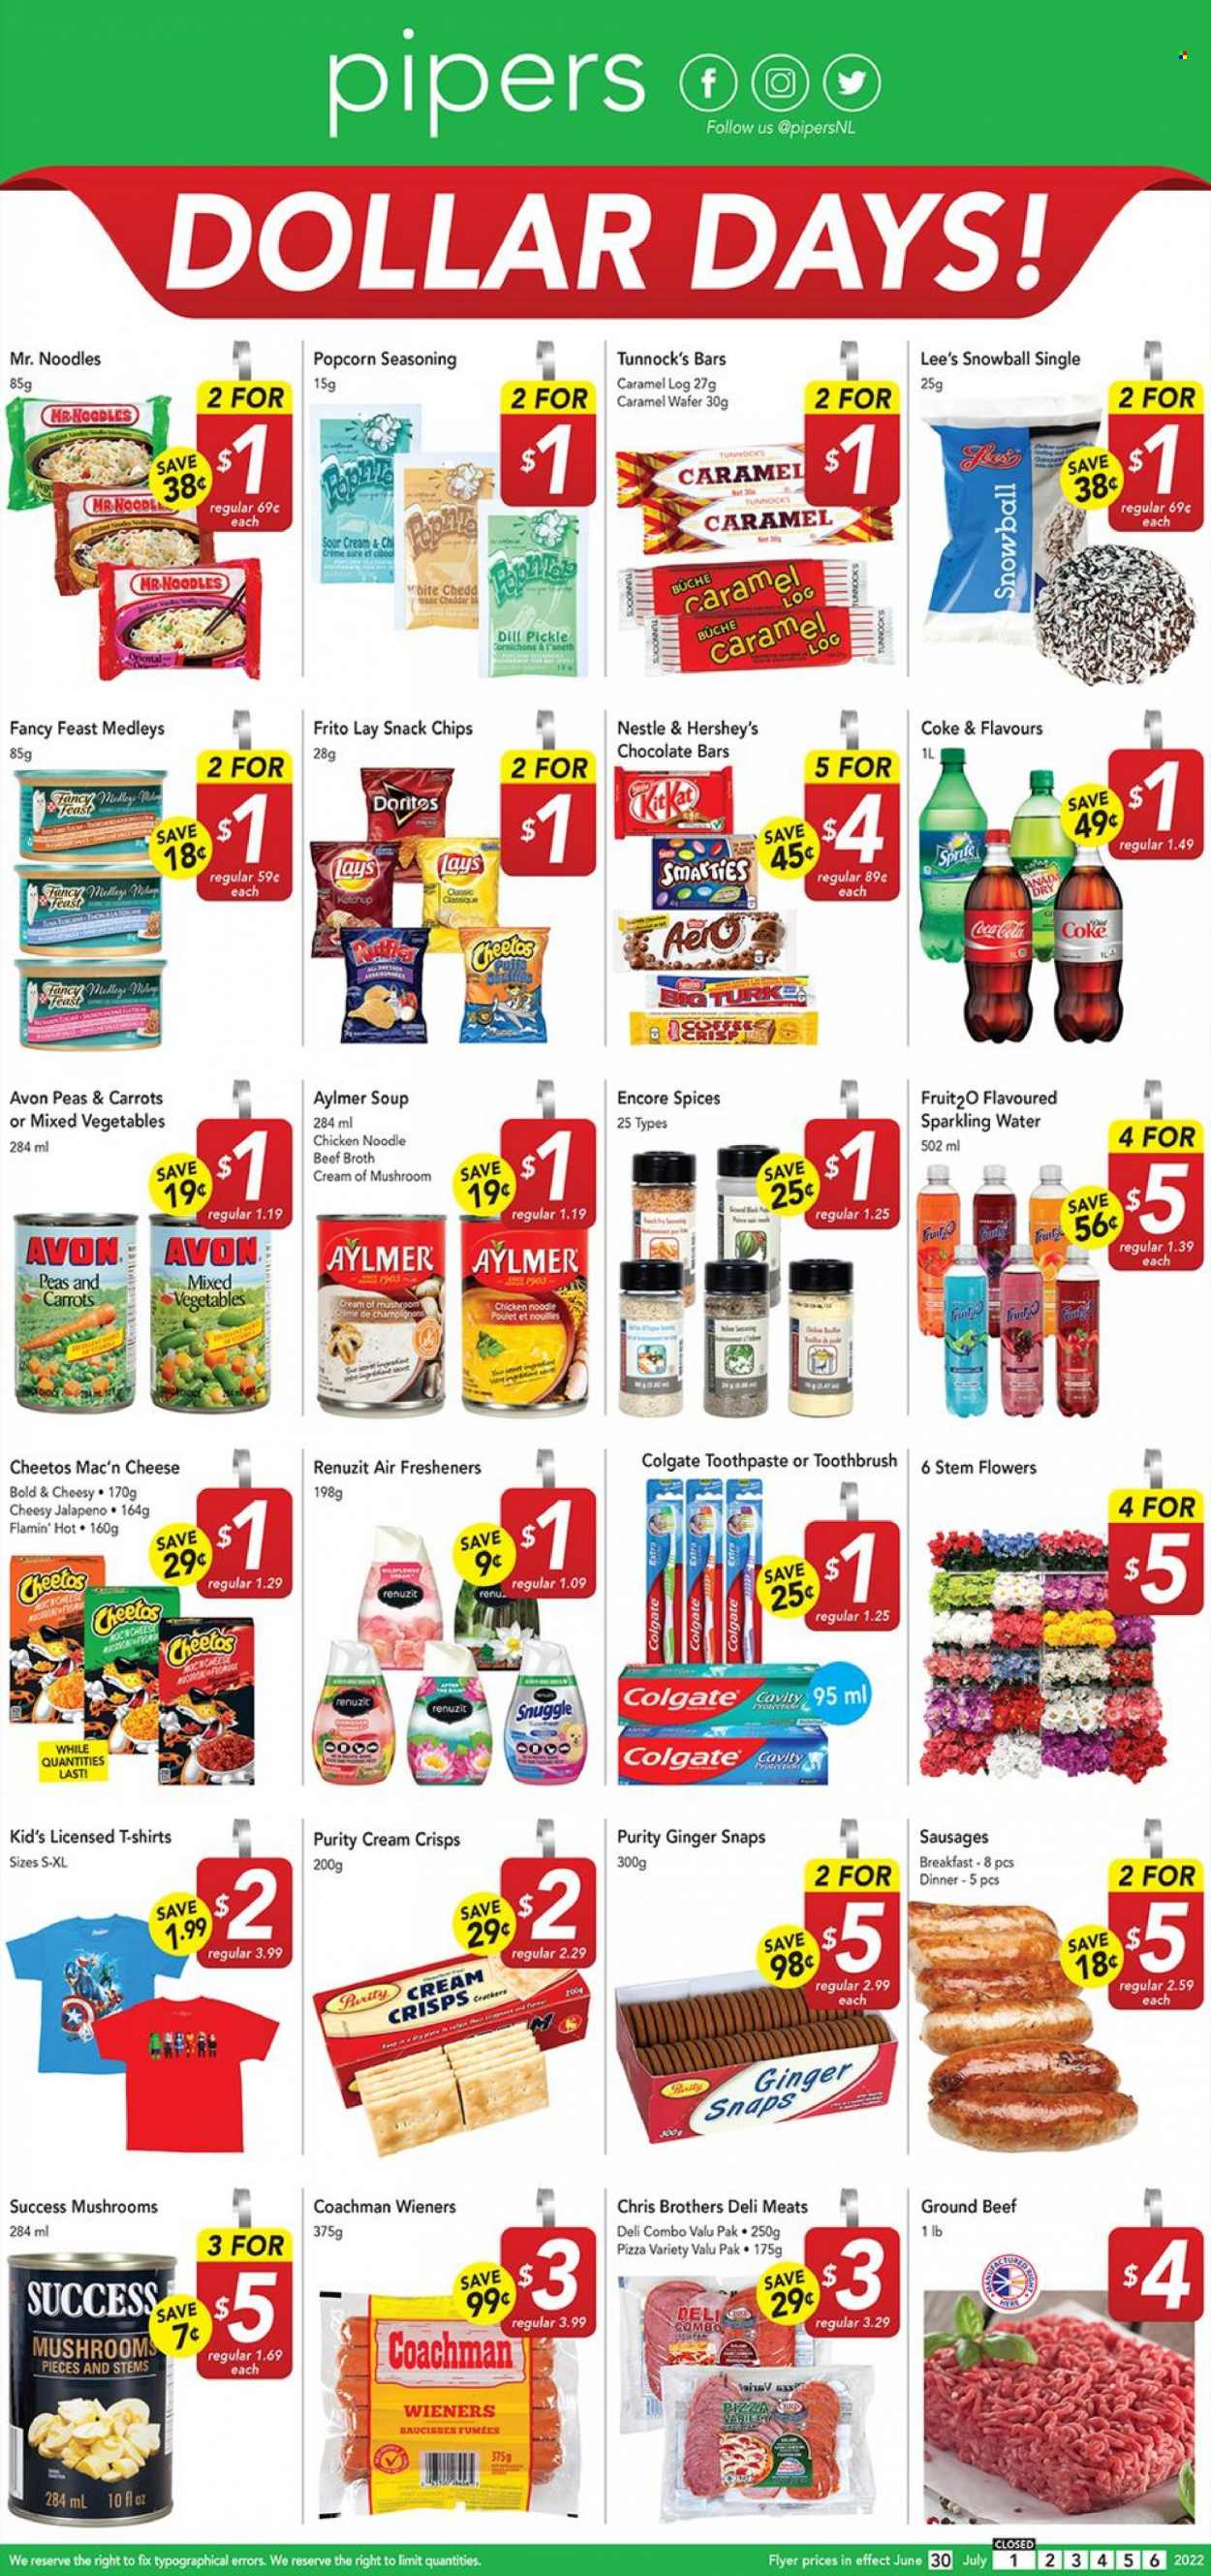 thumbnail - Pipers Flyer - June 30, 2022 - July 06, 2022 - Sales products - carrots, jalapeño, pizza, soup, noodles, sausage, Hershey's, mixed vegetables, wafers, Halls, snack, crackers, chocolate bar, dill pickle, Doritos, Cheetos, chips, Lay’s, popcorn, beef broth, broth, dill, spice, caramel, Coca-Cola, Sprite, sparkling water, BROTHERS, Purity, beef meat, ground beef, Snuggle, Avon, toothbrush, toothpaste, Sure, Renuzit, air freshener, Fancy Feast, Lee, t-shirt, Colgate, Nestlé, ketchup, Smarties. Page 1.